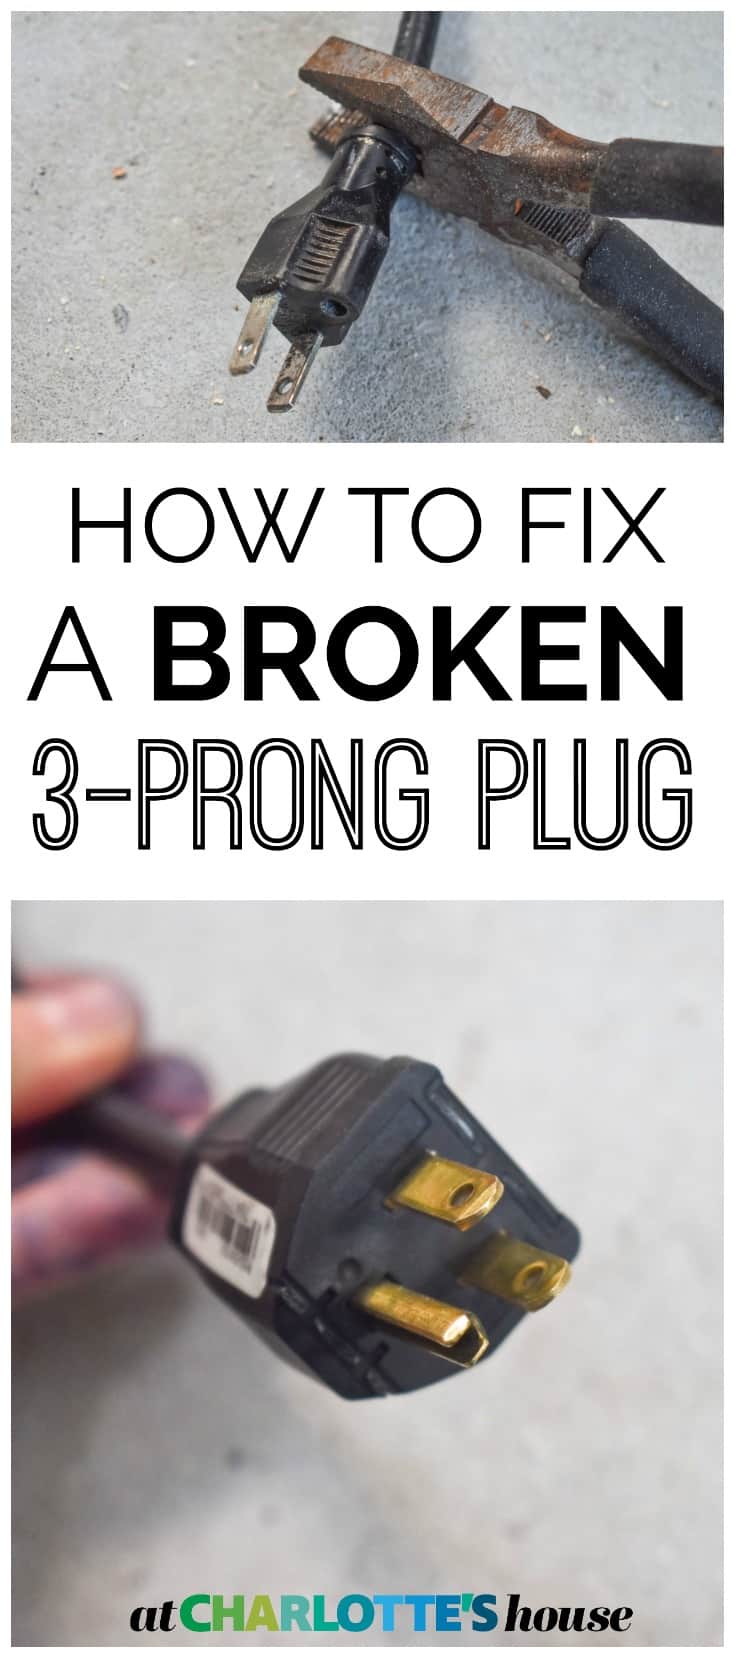 it's much easier than you think to replace a broken 3-prong plug